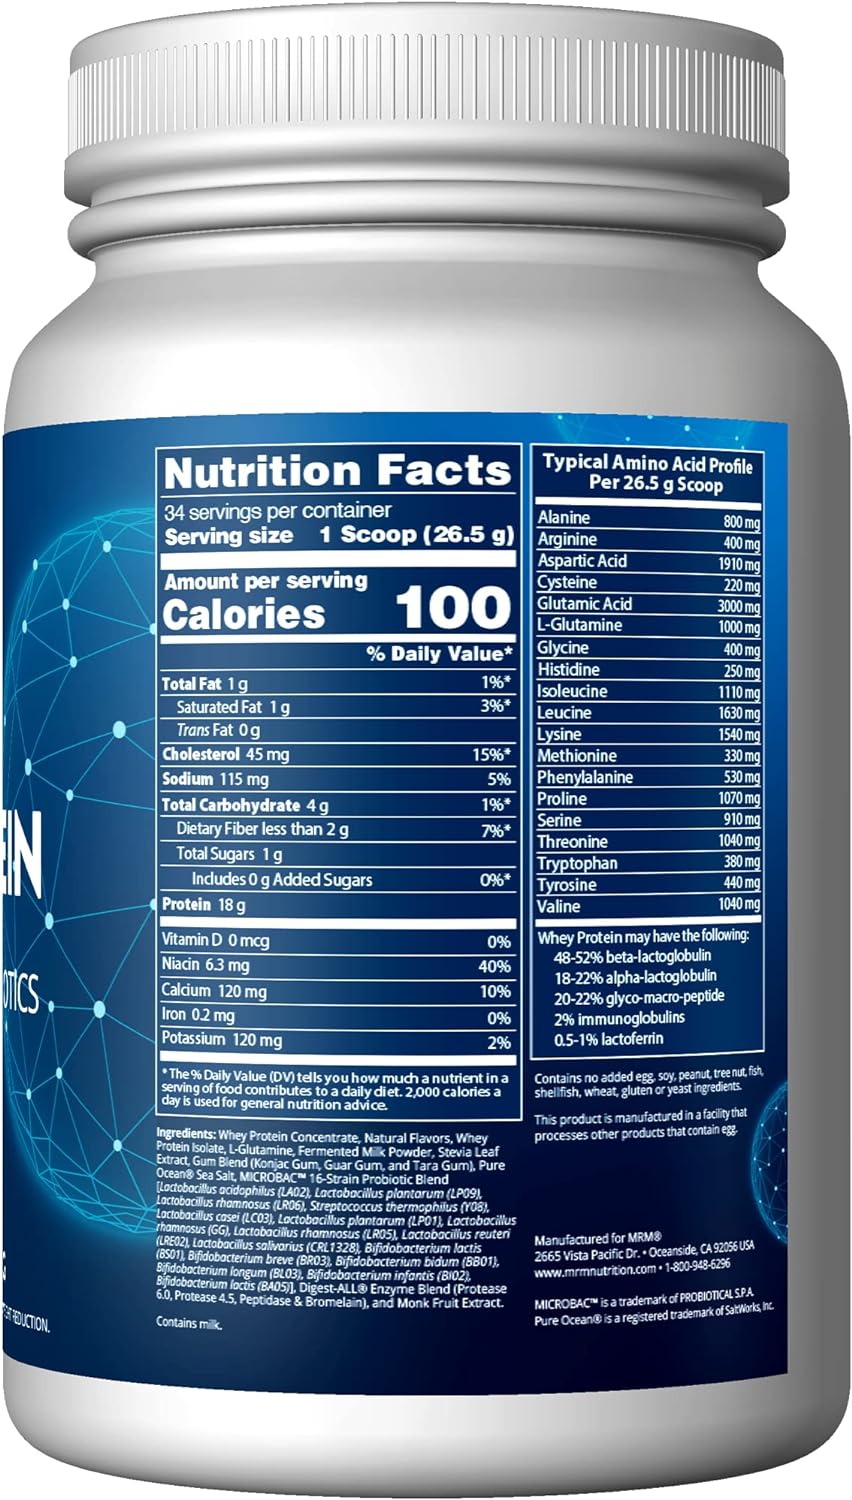 MRM Nutrition Whey Protein | Vanilla Flavored |18g Protein | with 2 Billion probiotics + Digestive enzymes + BCAAs | High Absorption + Digestion | Hormone + antibiotic Free | 33 Servings